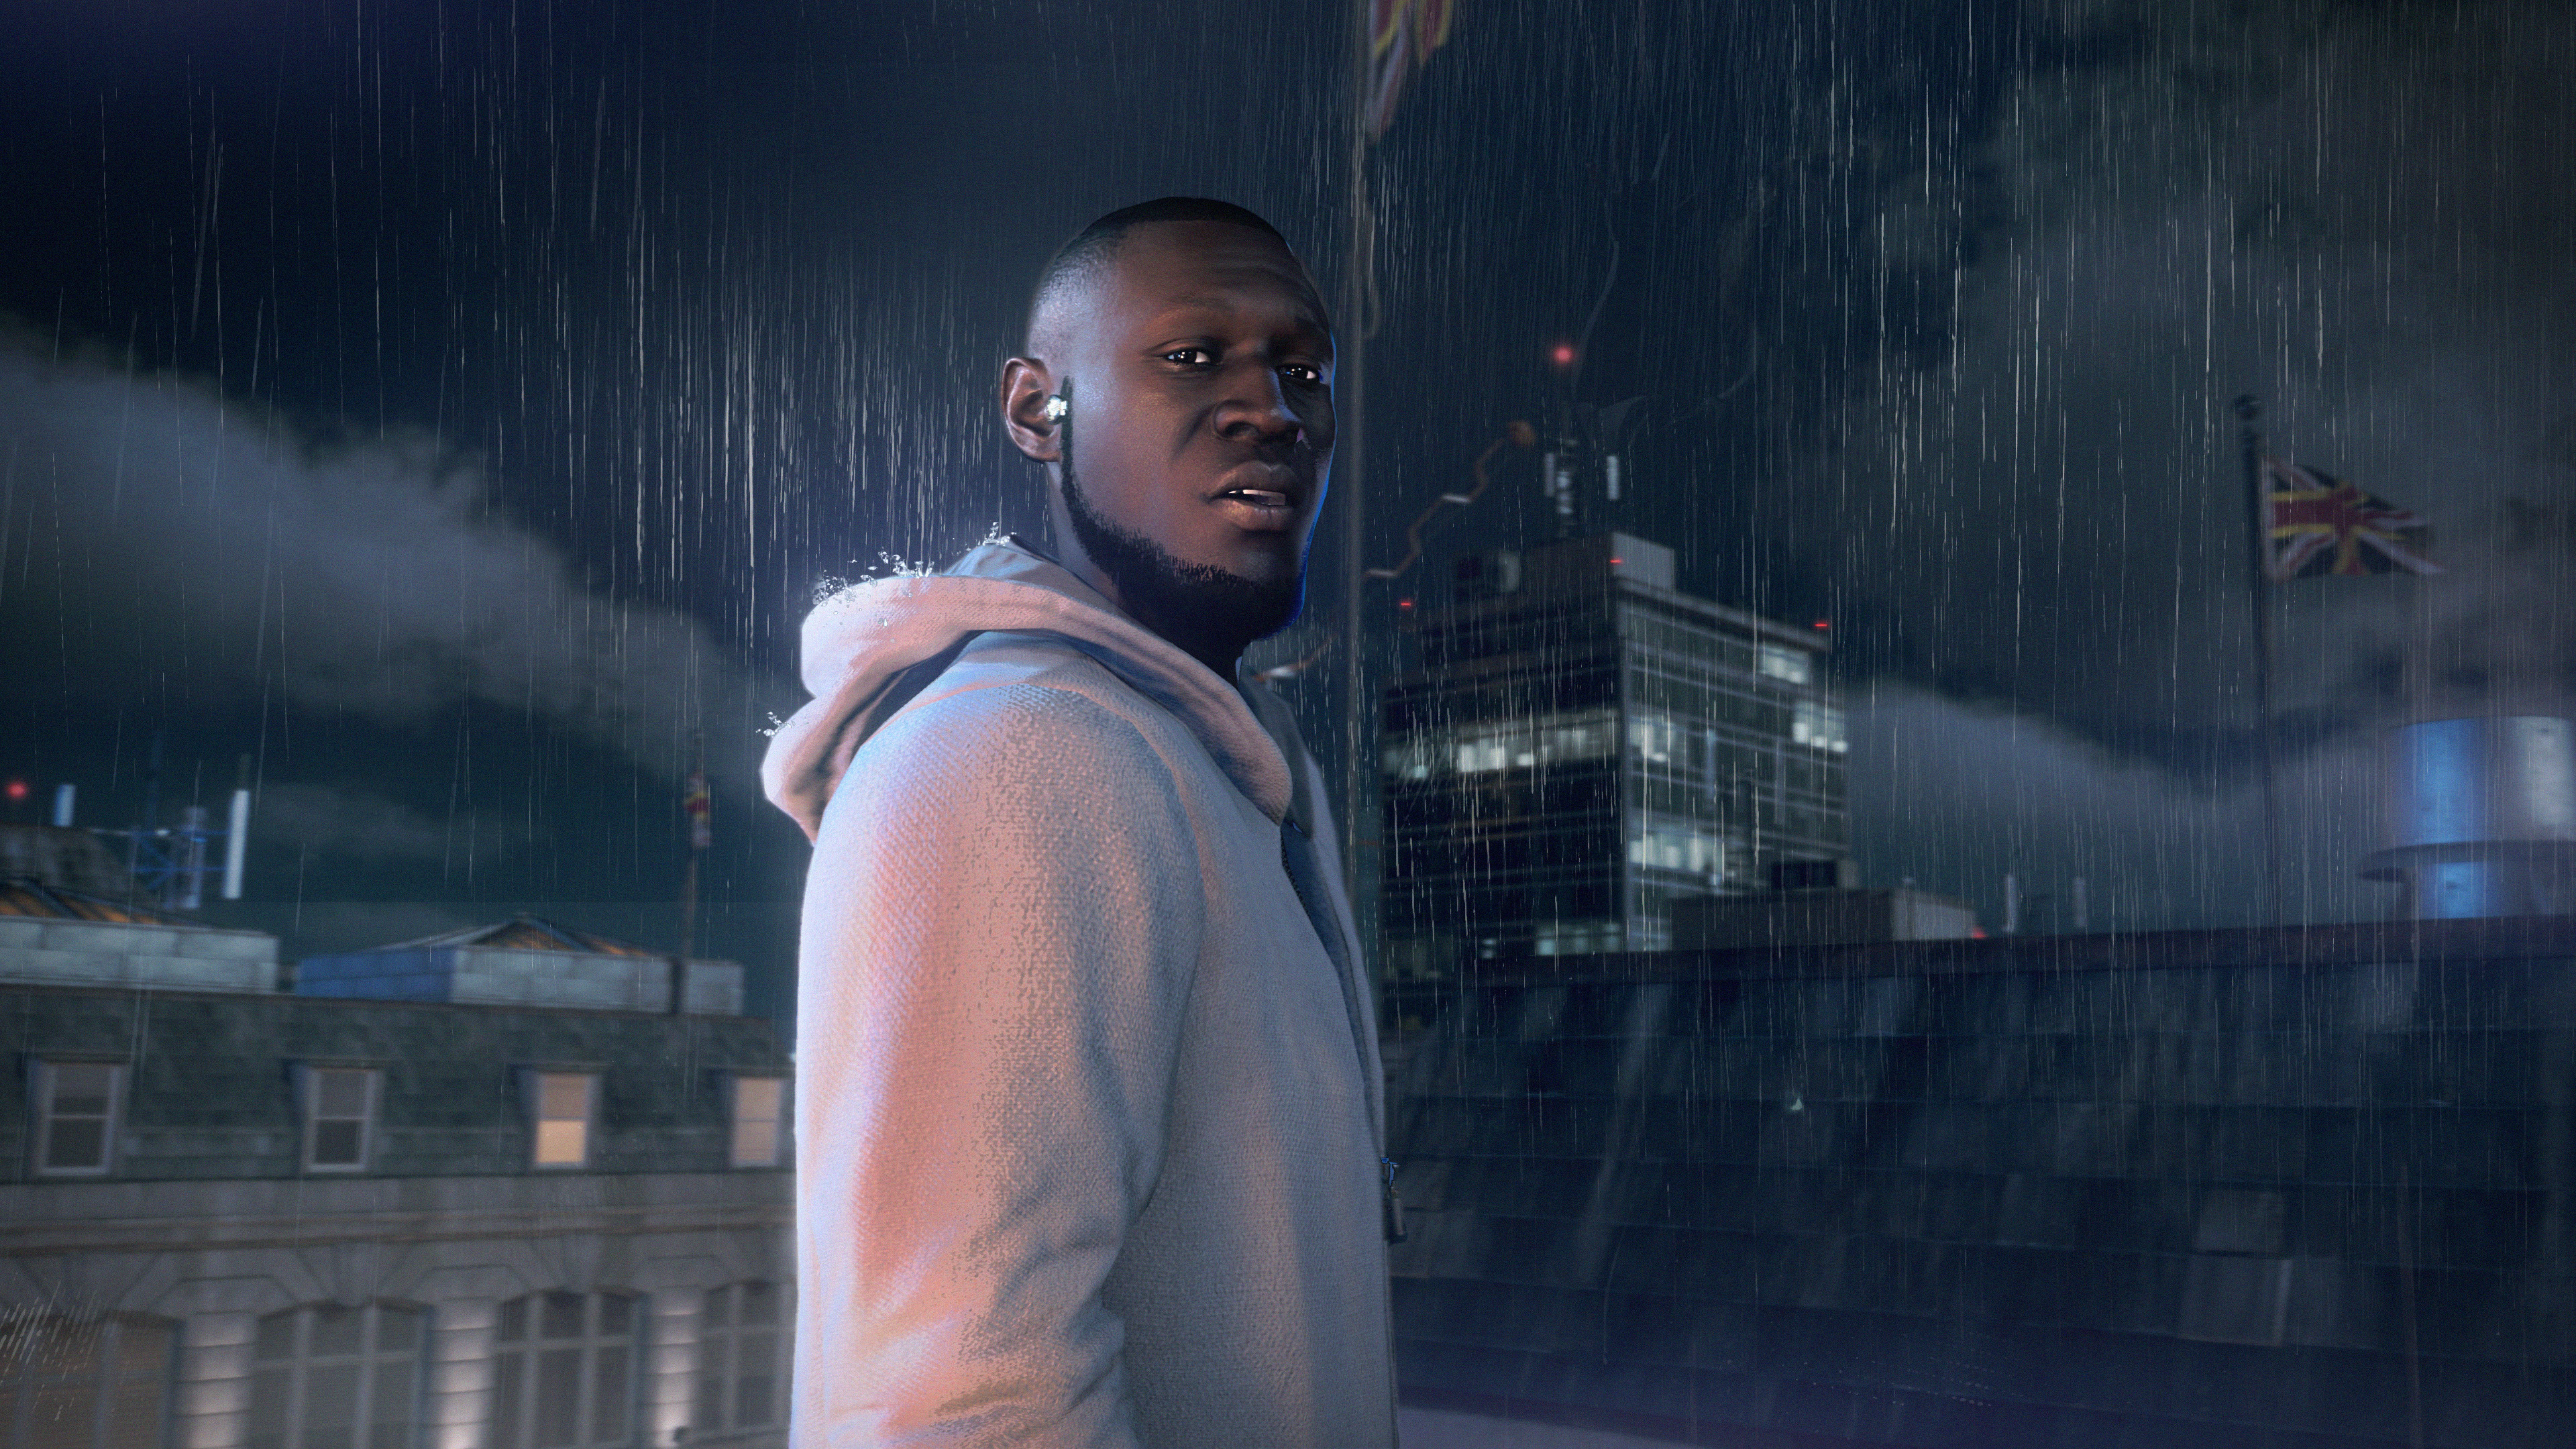 2560x1024 Stormzy Watch Dogs Legion Recruits 2560x1024 Resolution Wallpaper Hd Games 4k Wallpapers Images Photos And Background Wallpapers Den